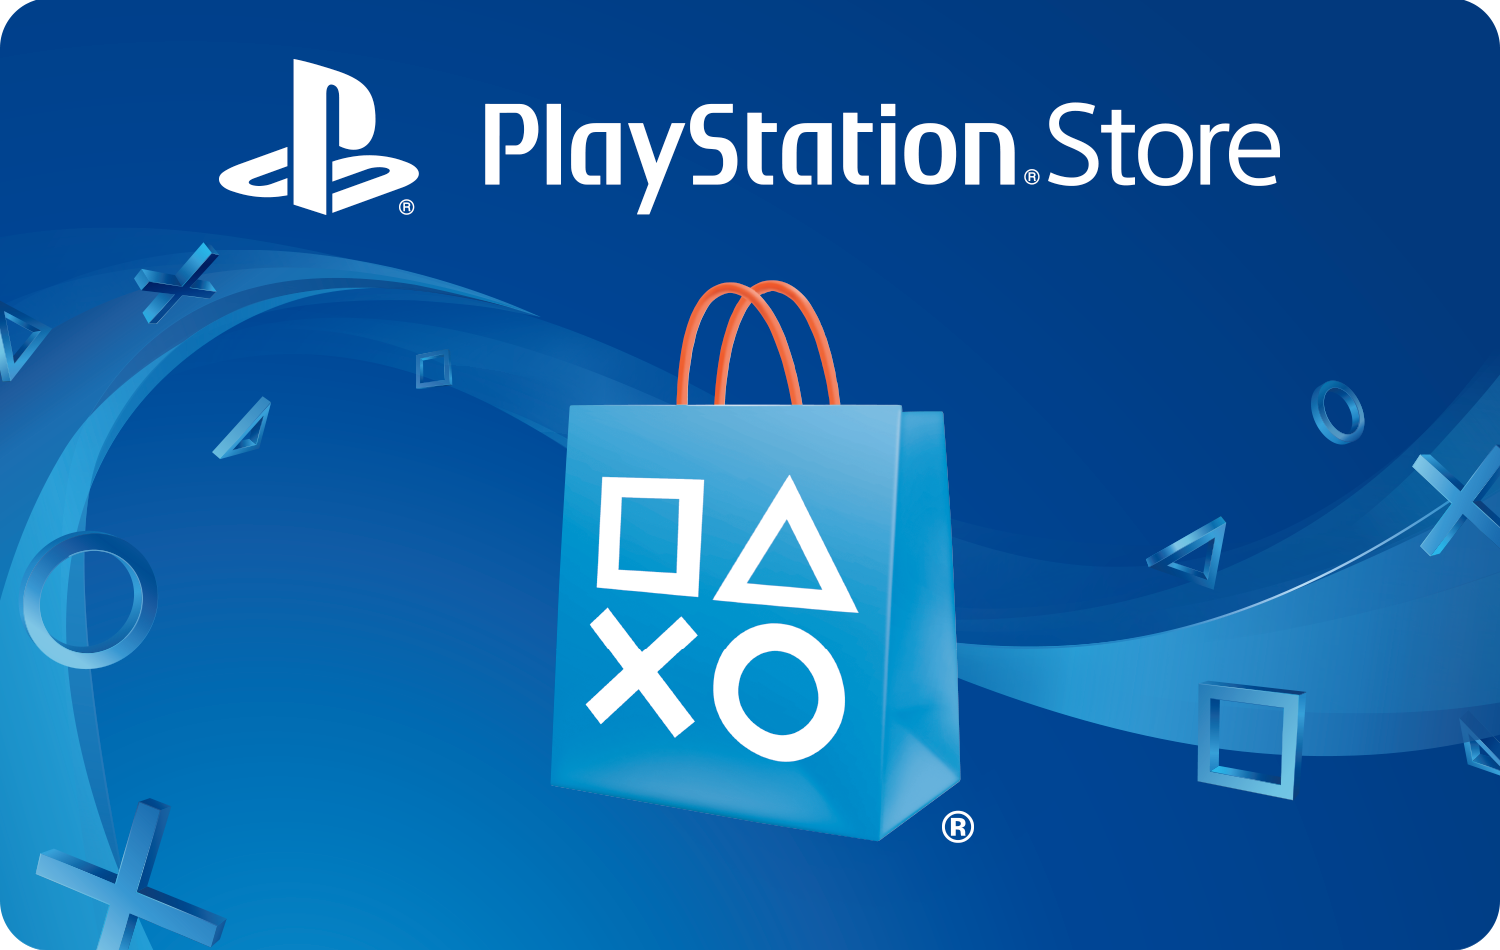 Ps store turkey 4pda. PLAYSTATION Store. PLAYSTATION Store Gift Card. Российский PS Store. Магазин PLAYSTATION.